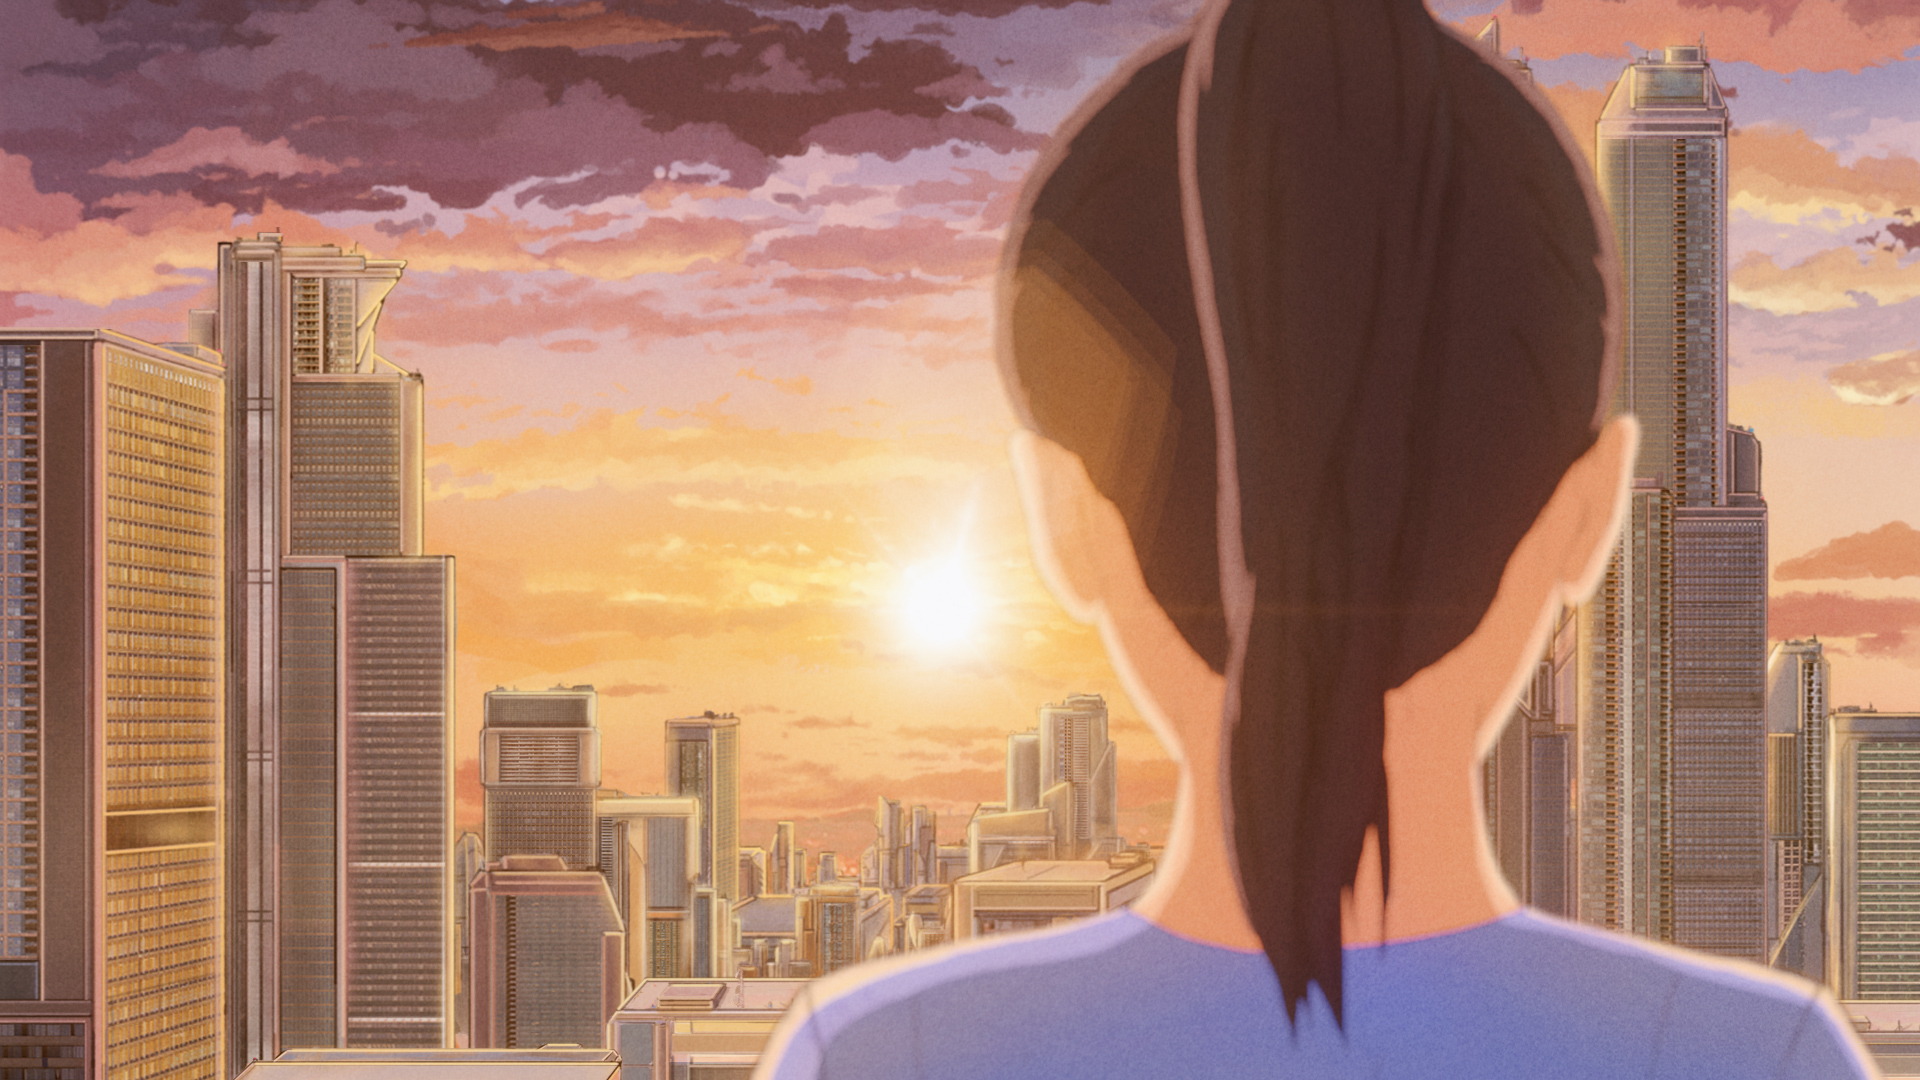 Anime 1920x1080 outdoors digital art anime city city sunset glow clouds sky anime building cityscape anime girls sunset rooftops back focus ponytail